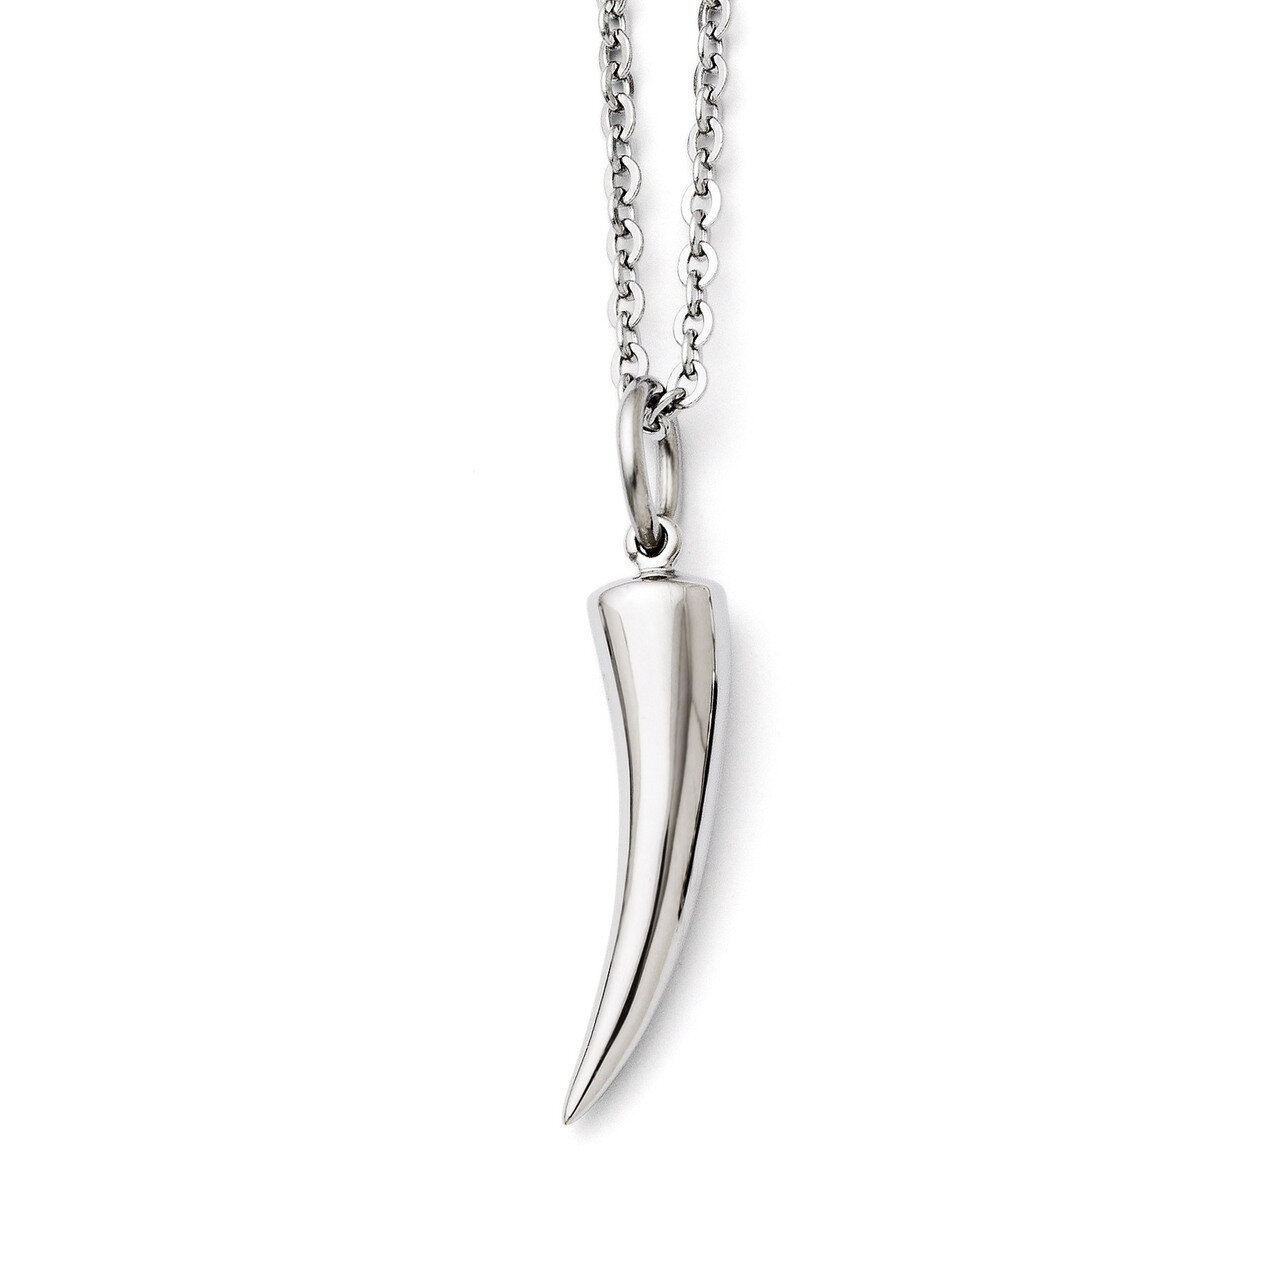 Polished Horn Necklace - Stainless Steel SRN1363